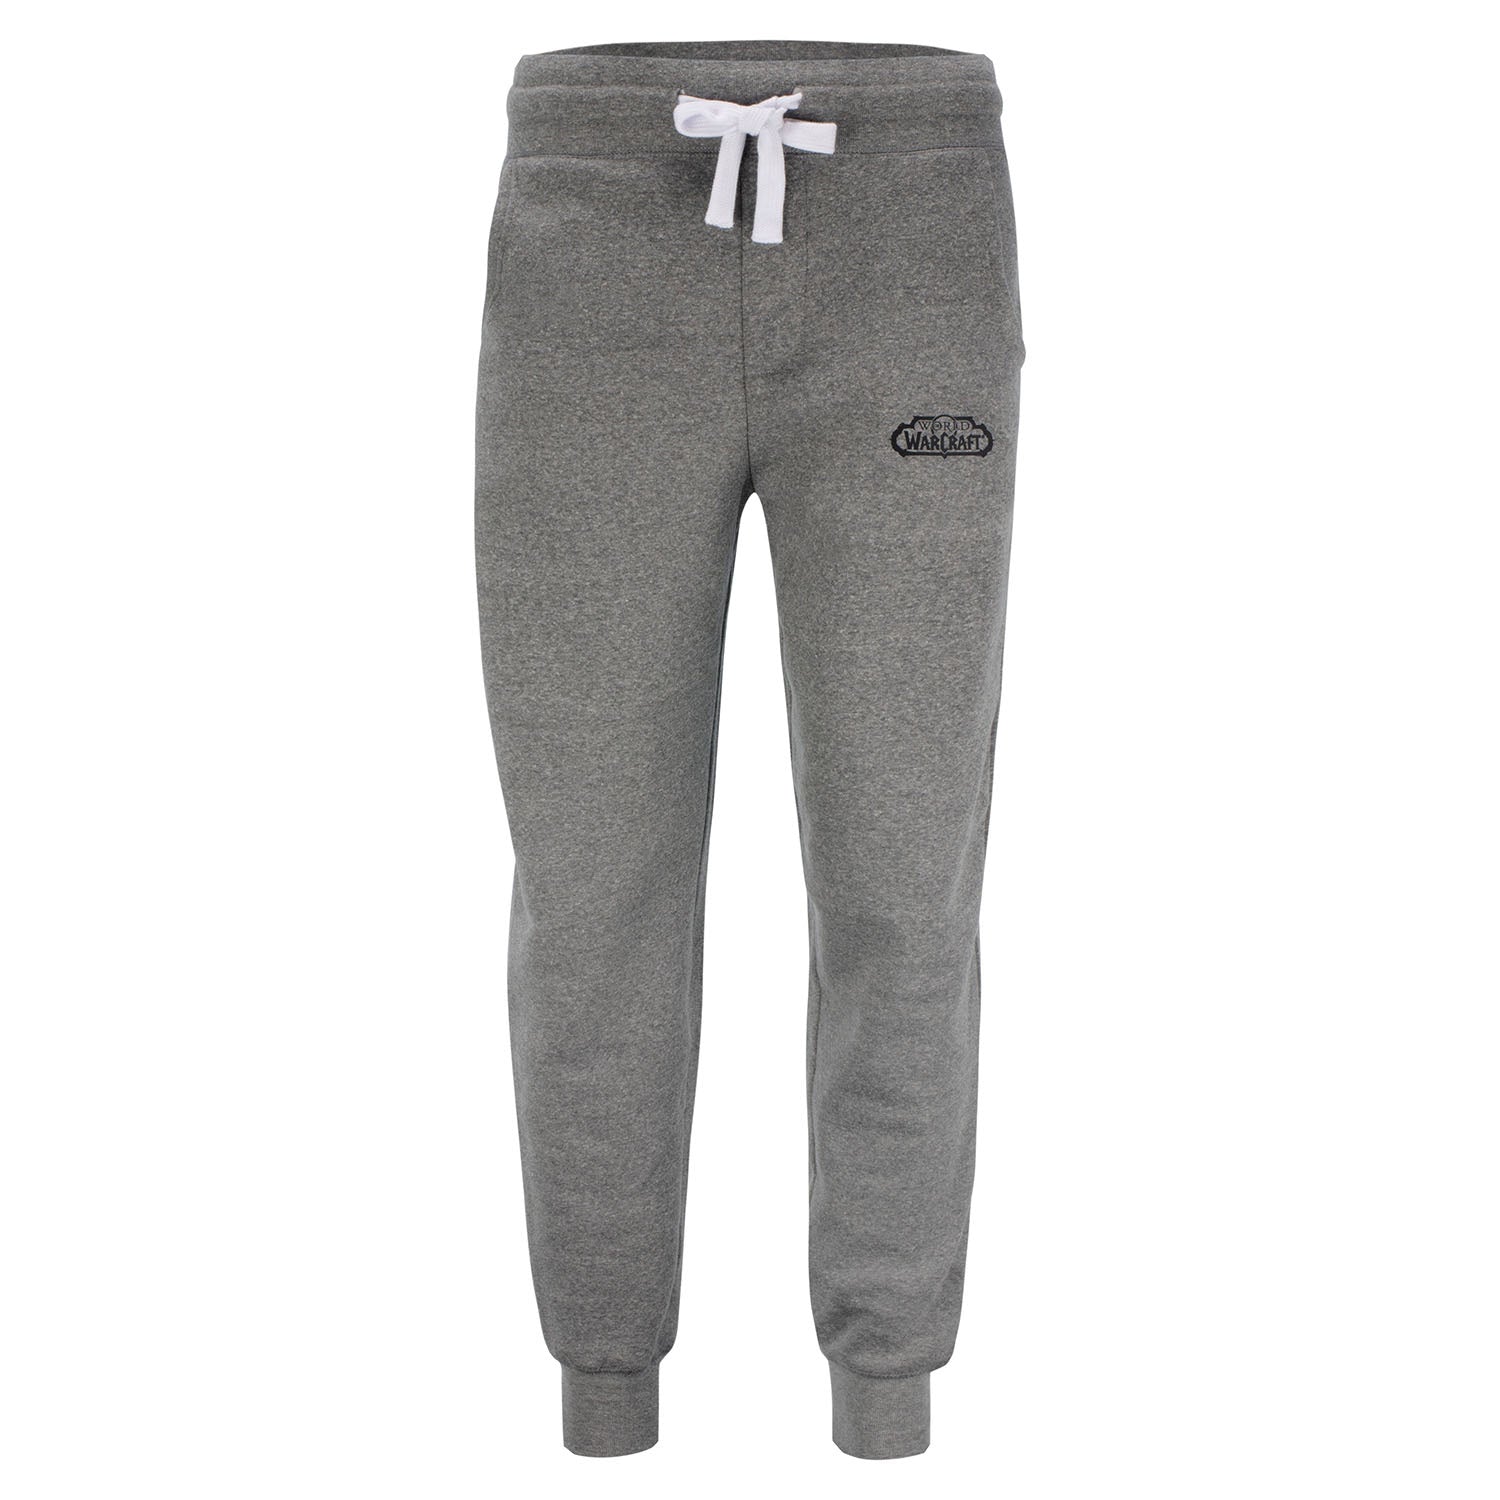 World of Warcraft Grey Joggers - Front View